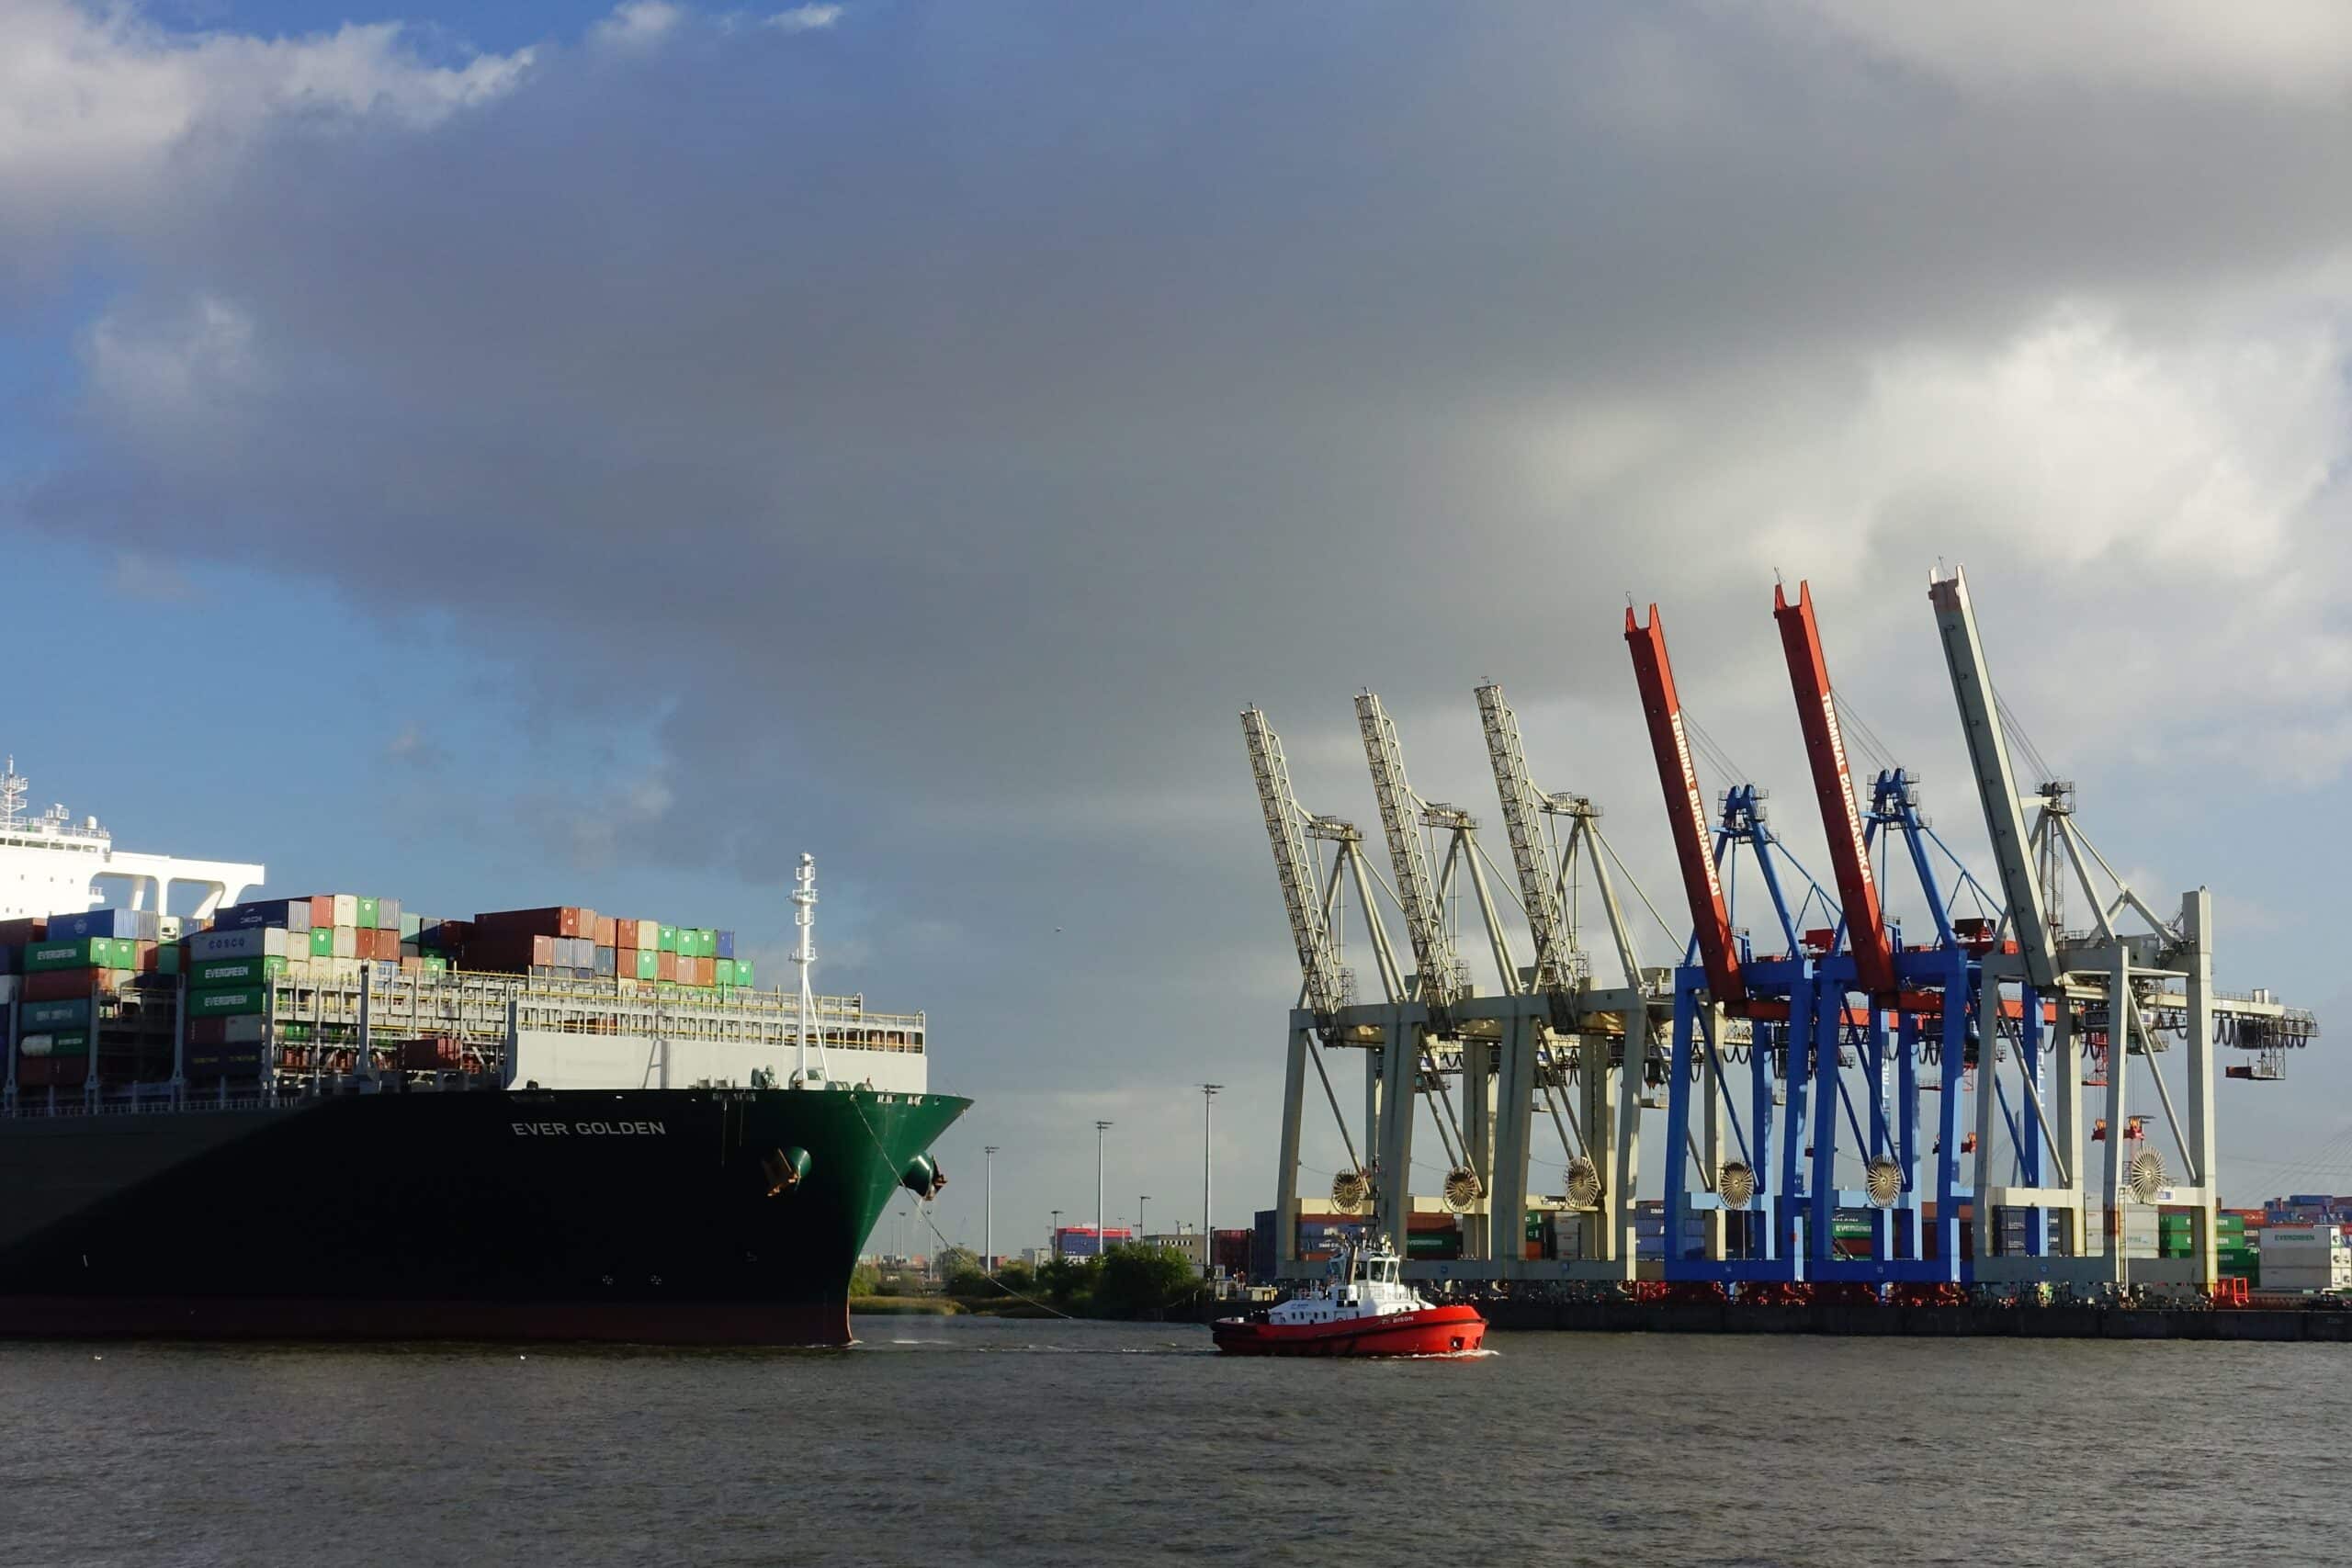 The Benefits of Partnering with Experienced Sea Freight Forwarders